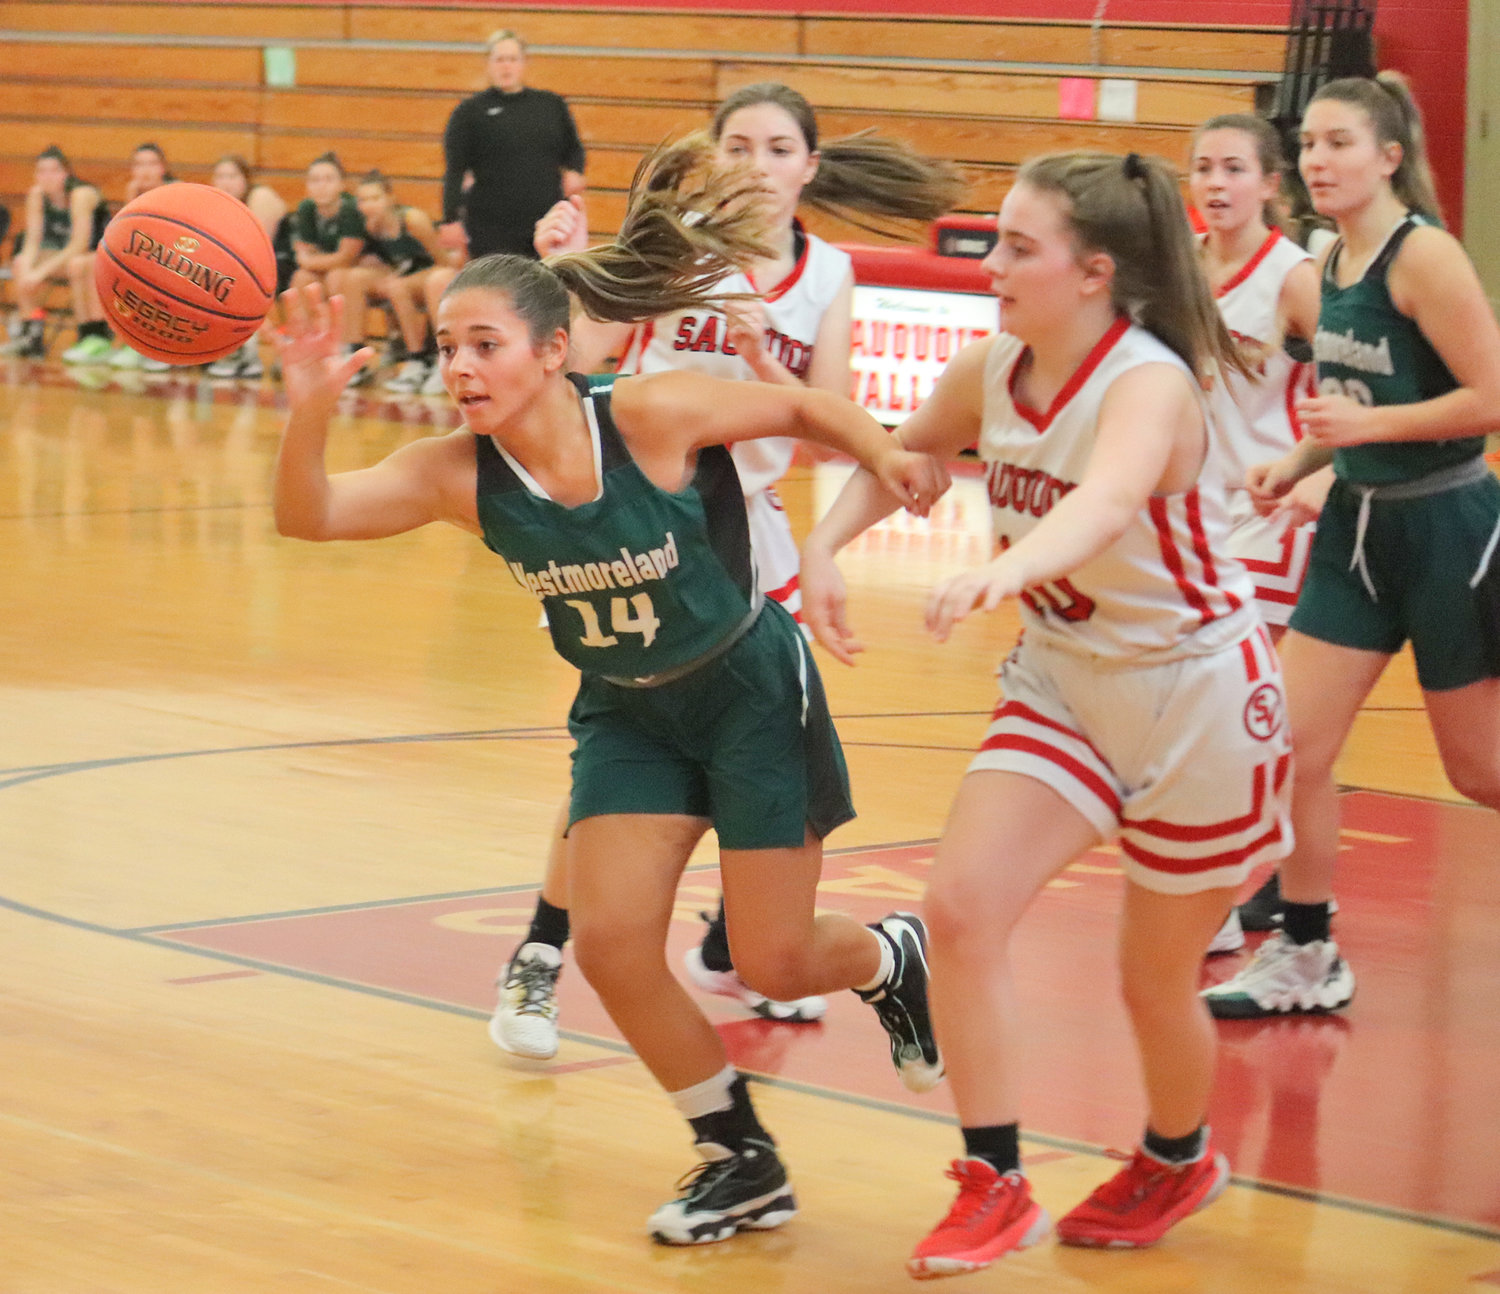 Westmoreland's Olivia Moore reaches out for the ball with Sauquoit's Allison Crandall at right in a Center State Conference game Saturday in Sauquoit. Westmoreland won 45-34.